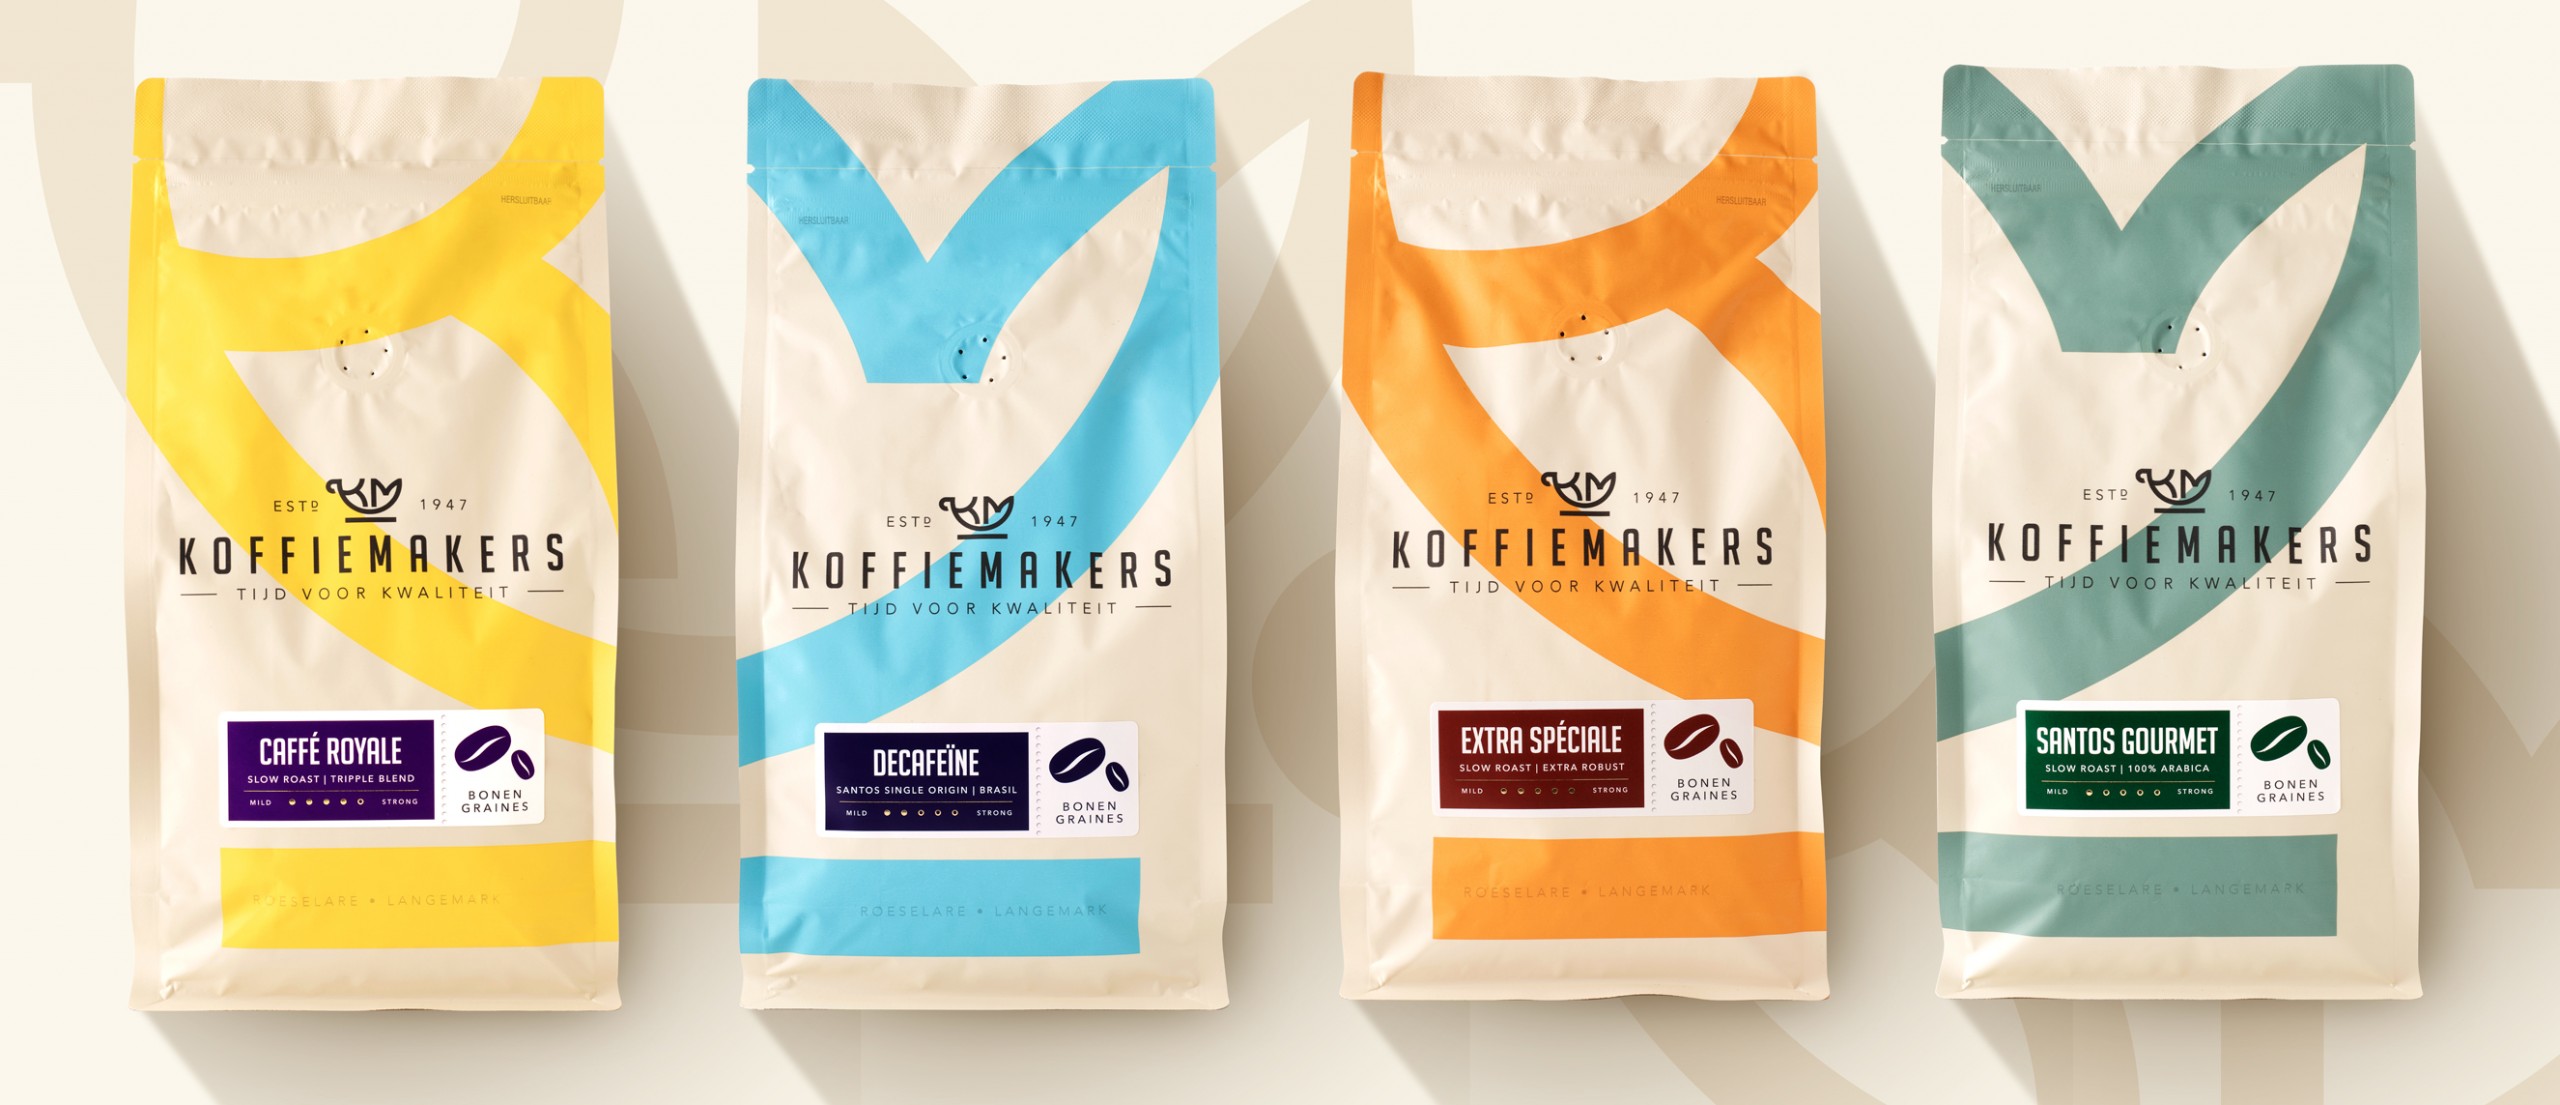 Quatre Mains package design - Package design Coffee packaging identity for Koffiemakers